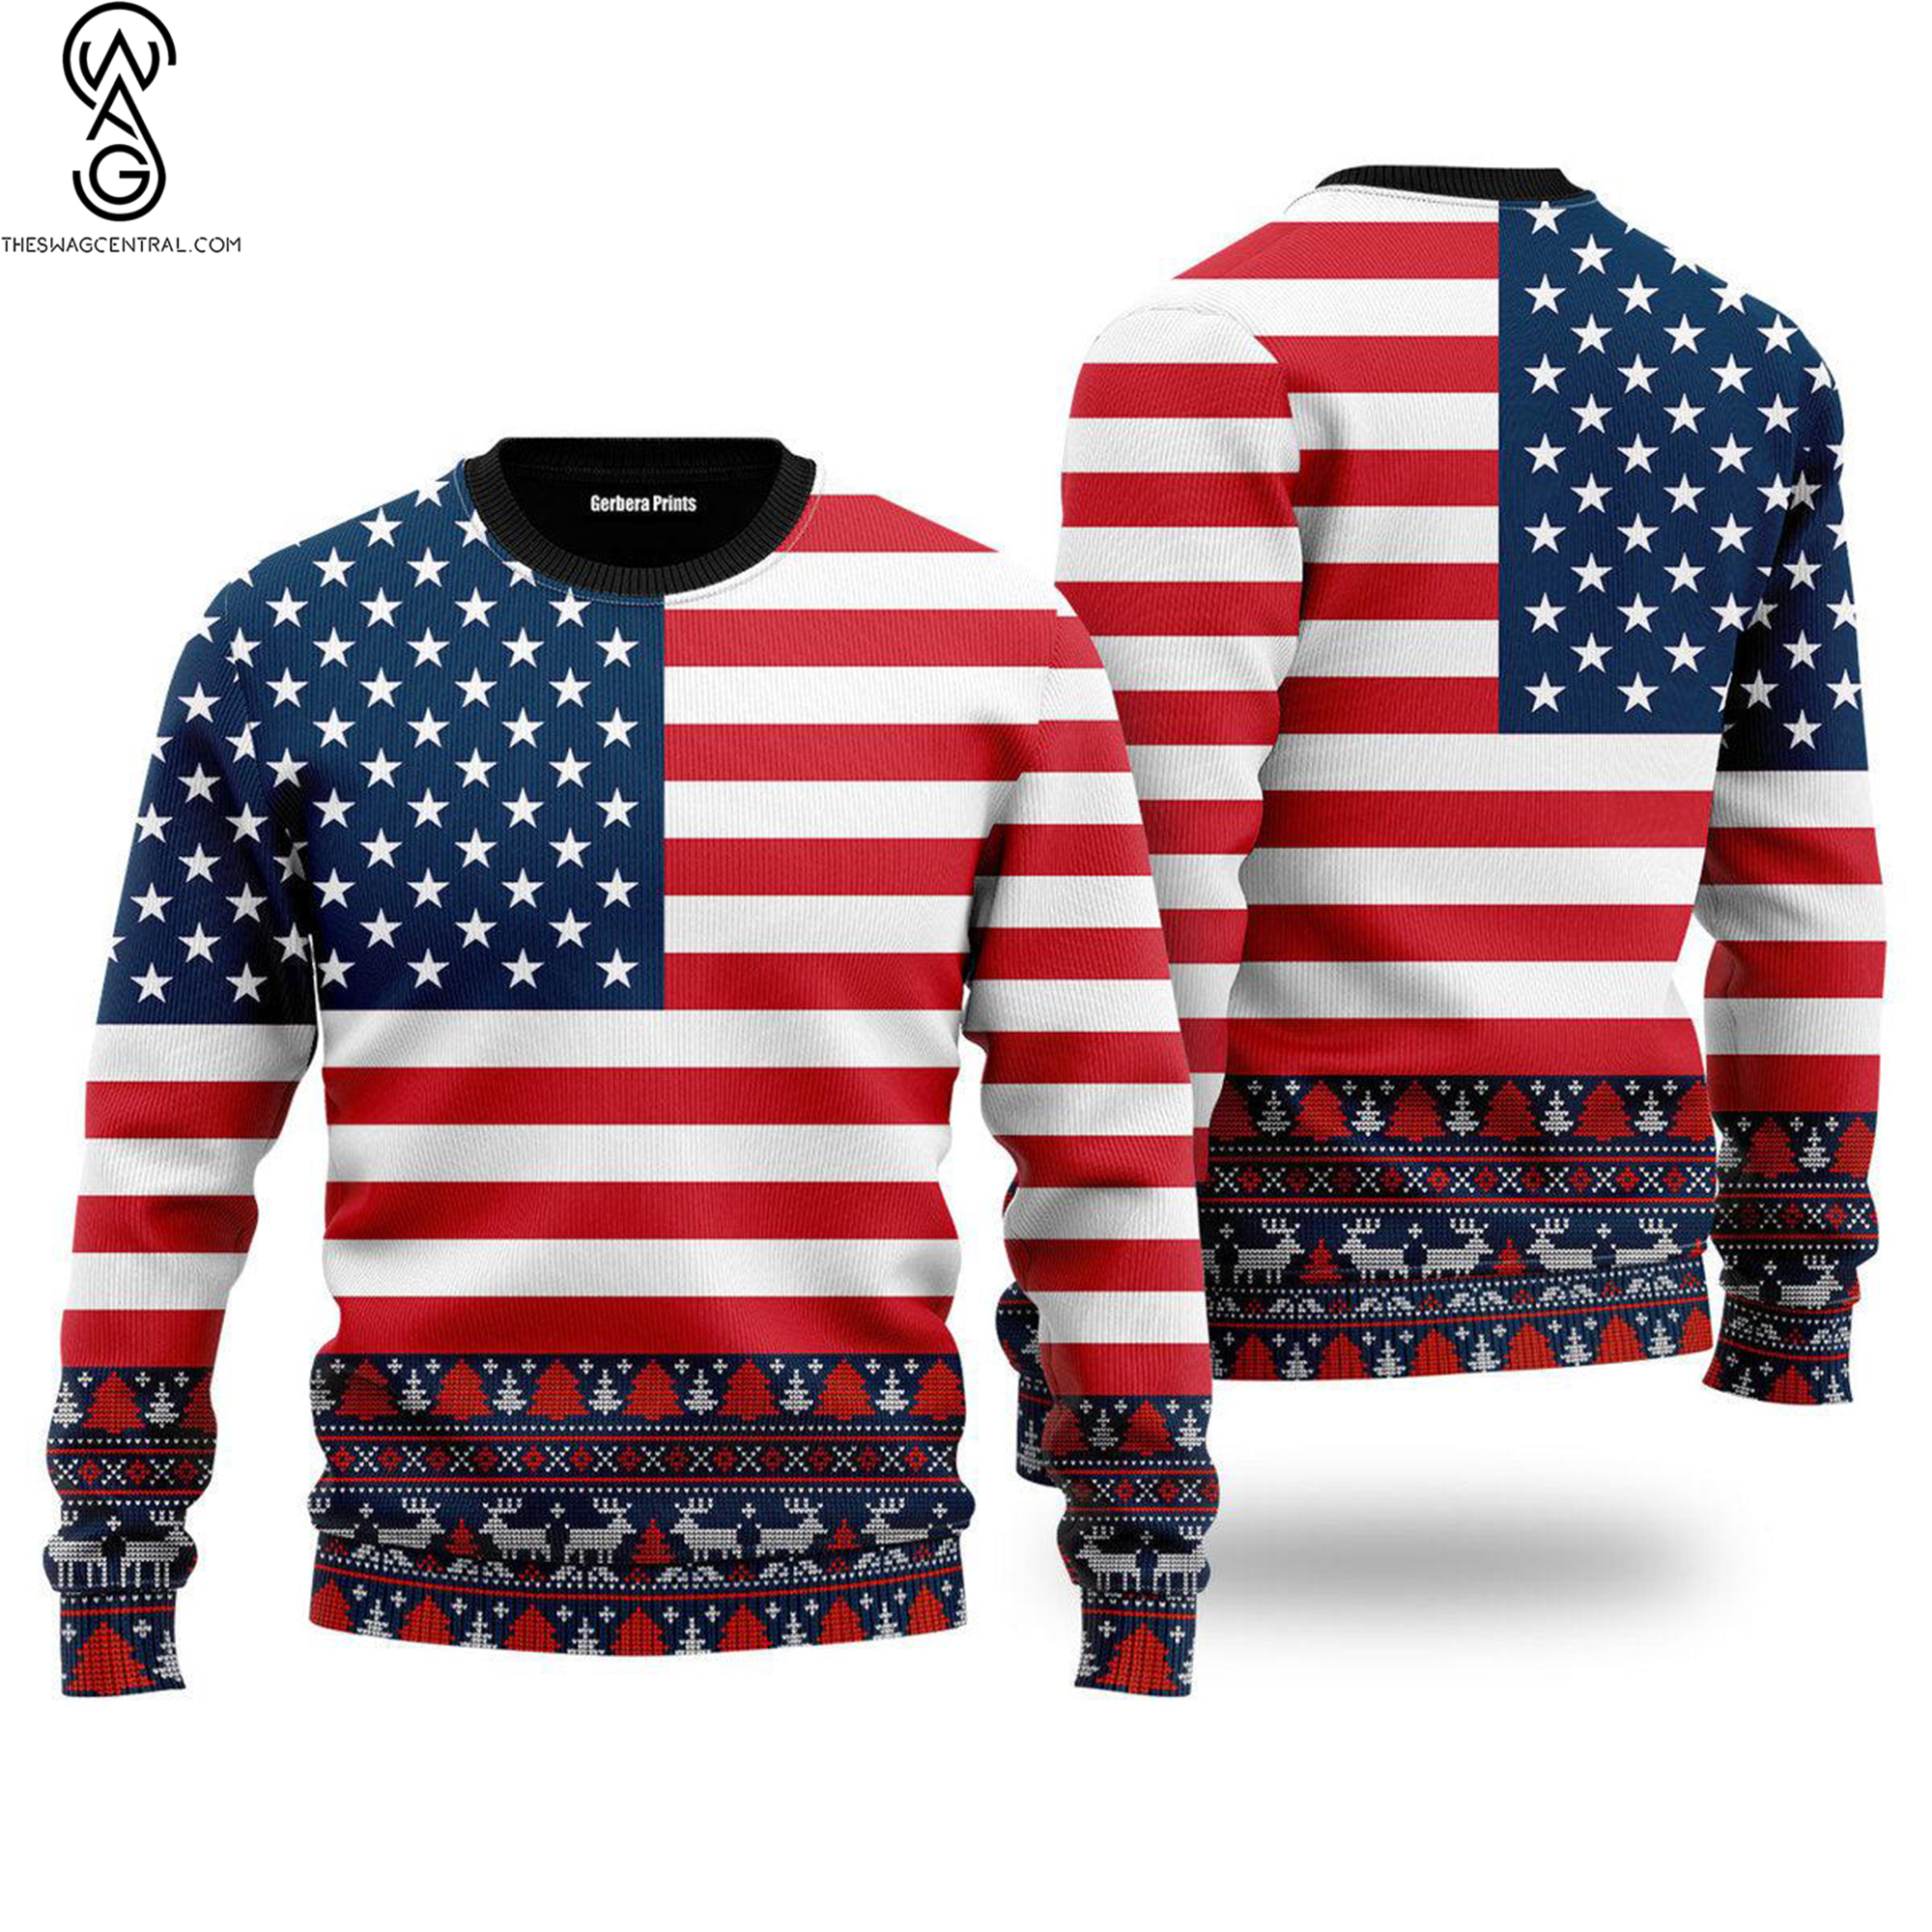 Wrap Yourself in Patriotism The American Flag Sweater - A Timeless Tribute to the USA